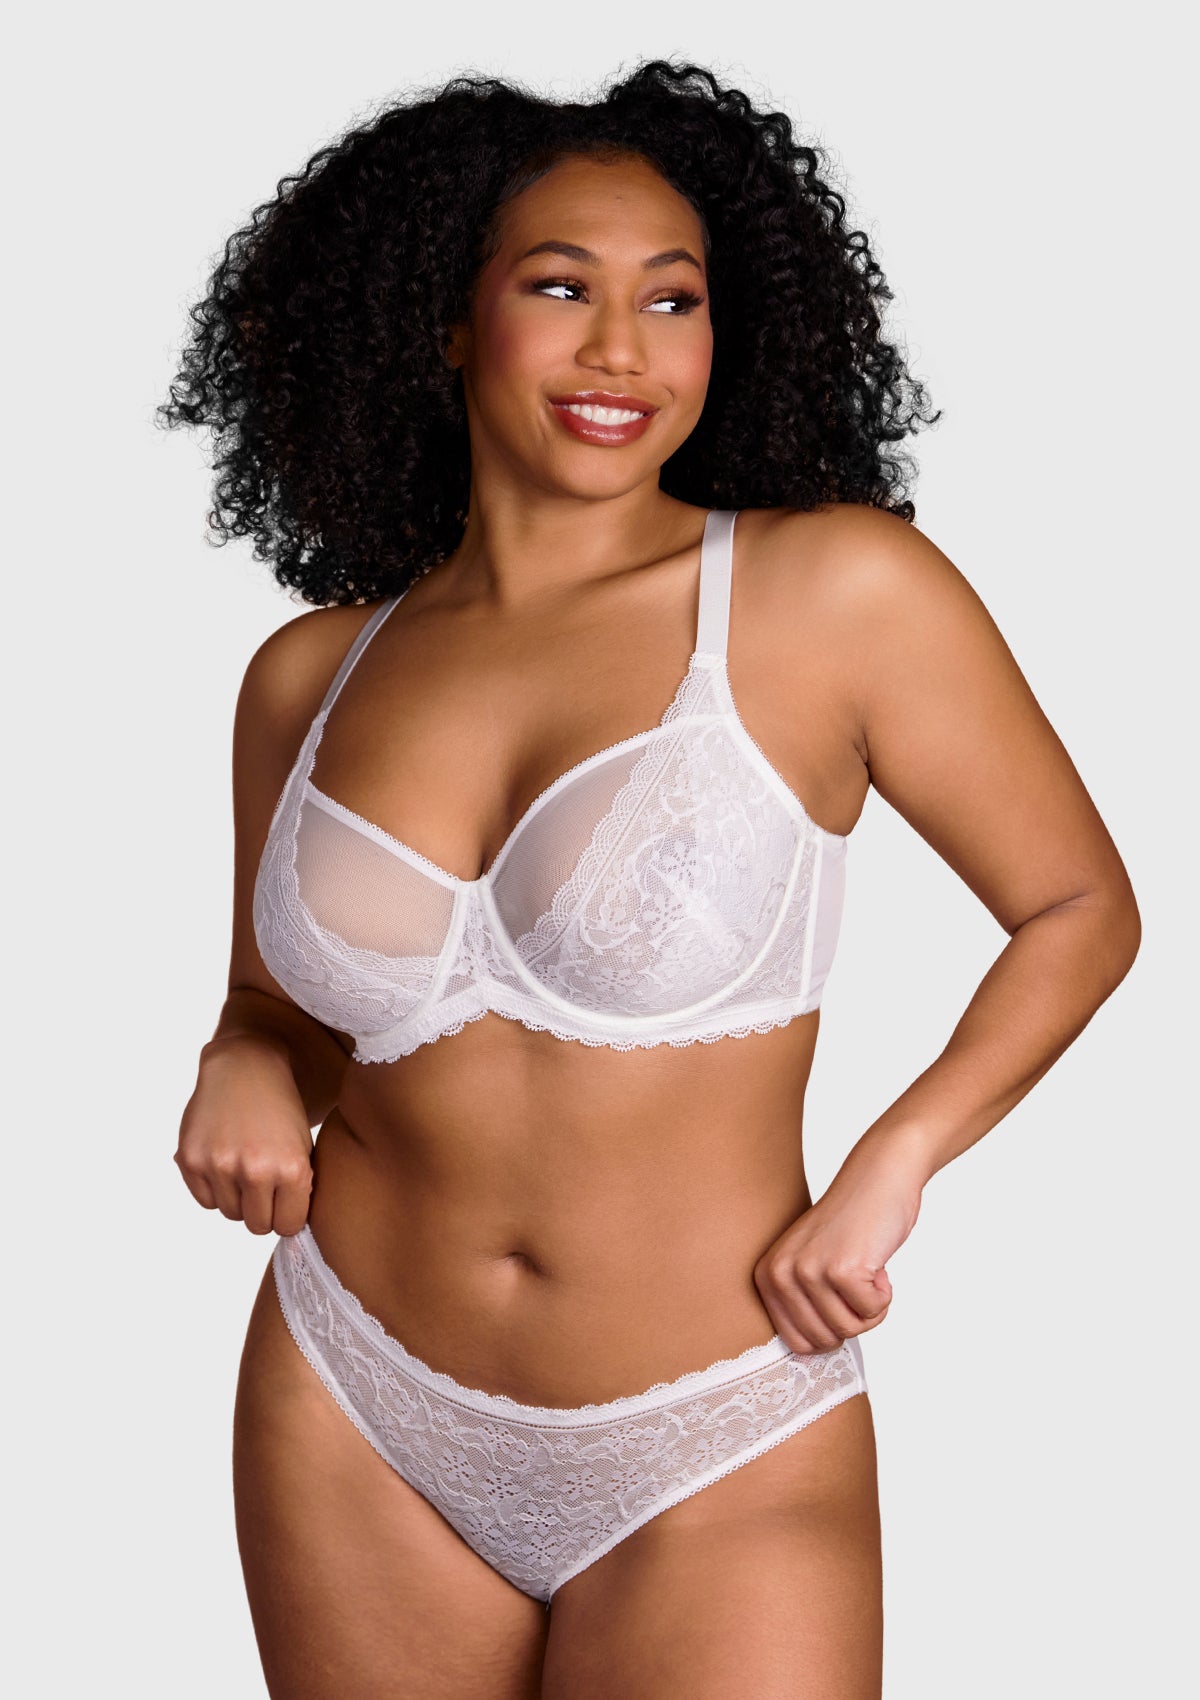 HSIA Anemone Big Bra: Best Bra For Lift And Support, Floral Bra - Black / 40 / D